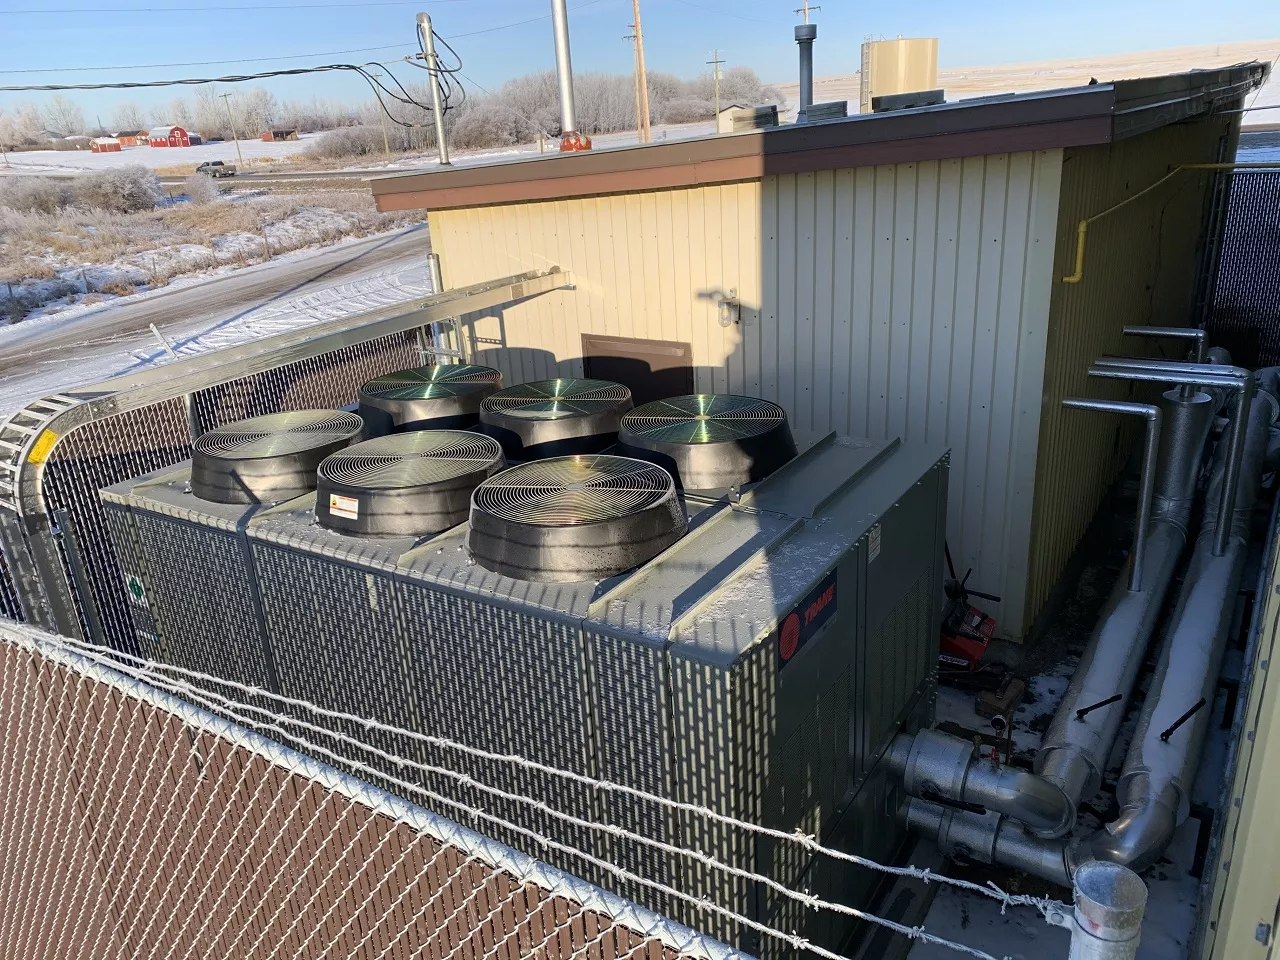 Trane replace the existing chiller at Ron Gorr Memorial Arena